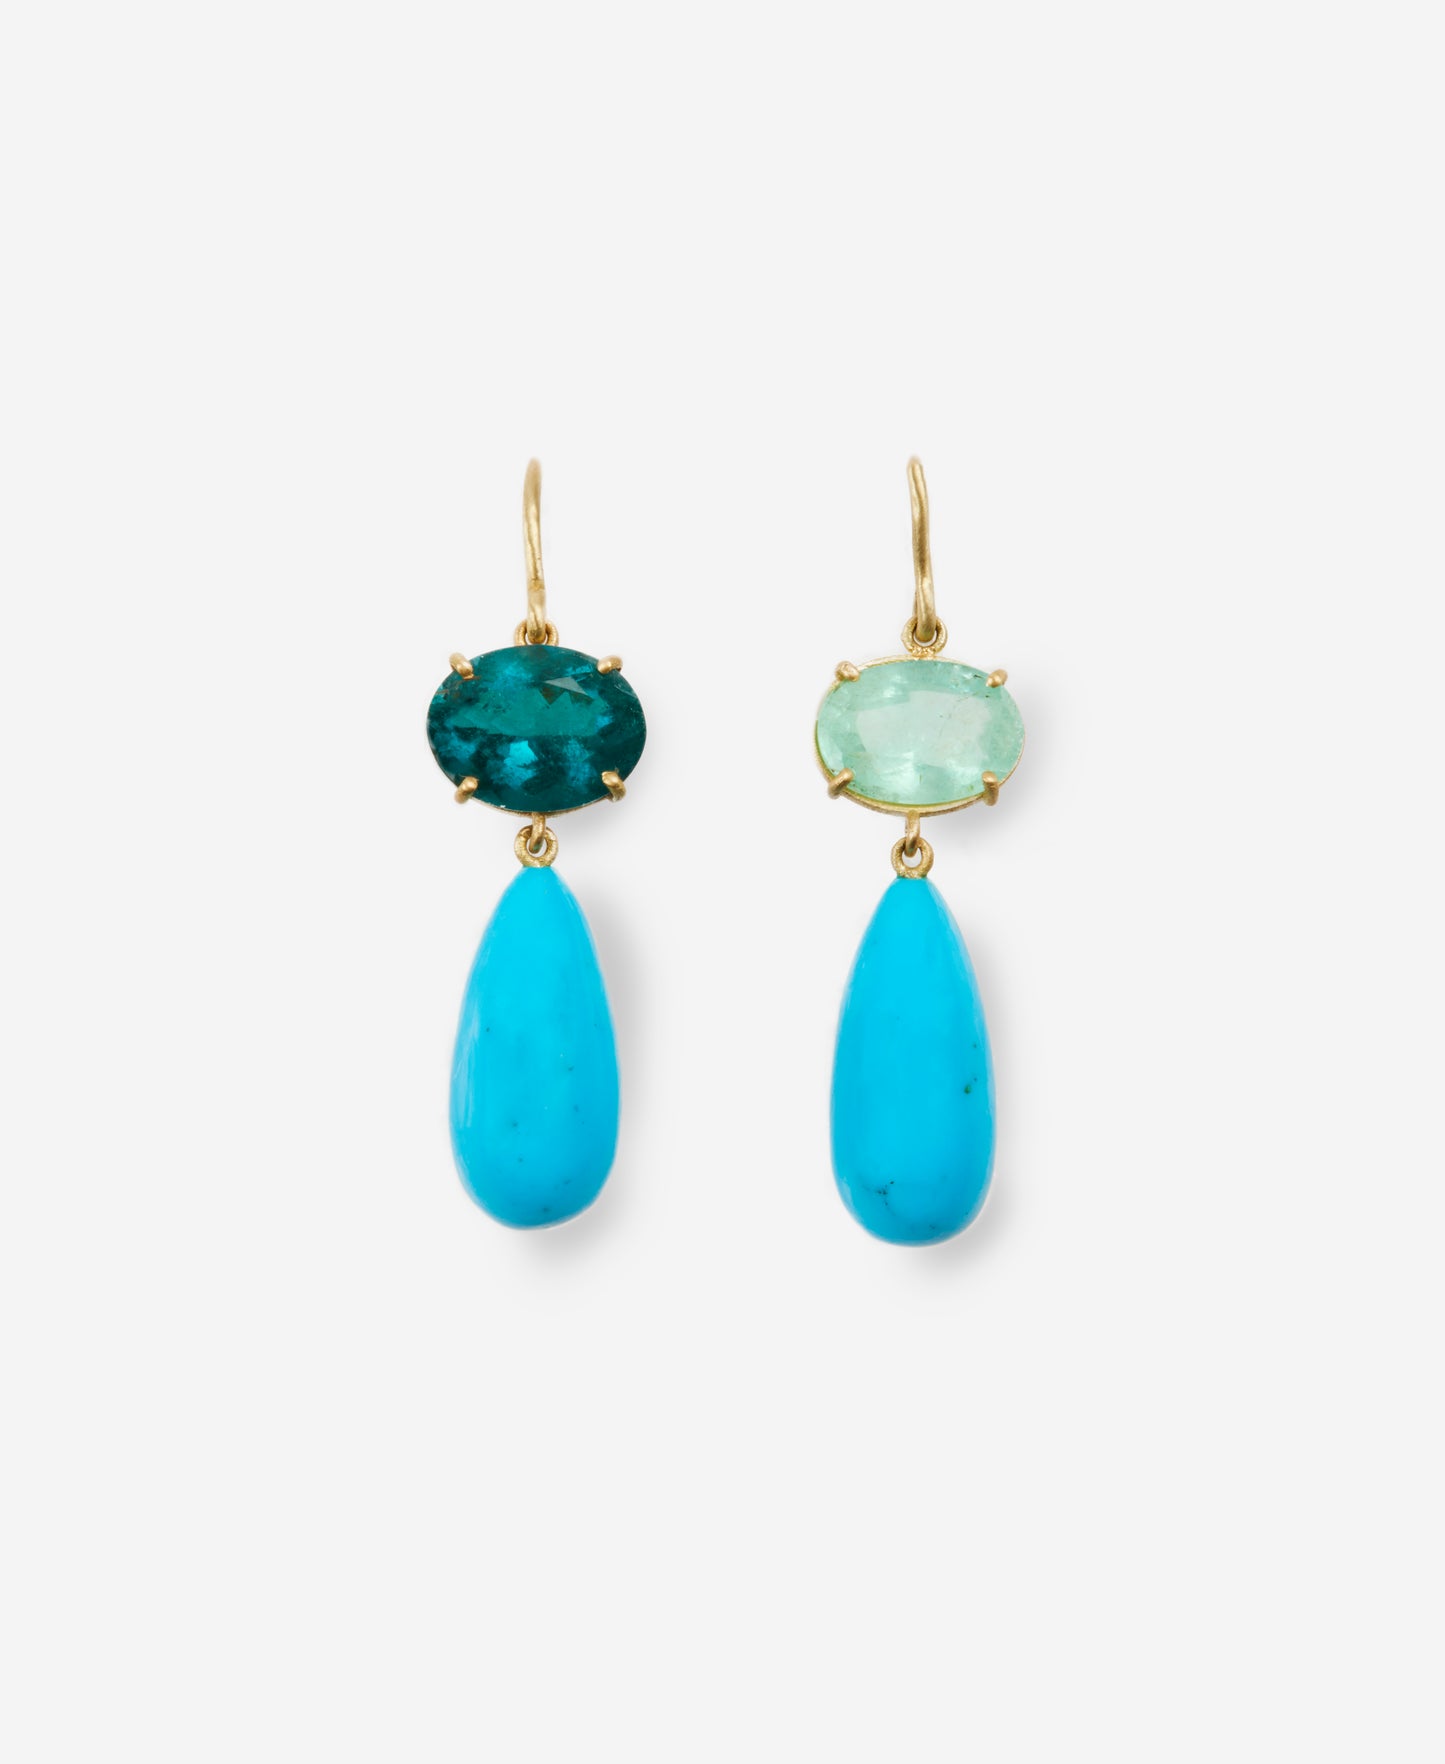 Mismatch Tourmaline and Turquoise Earrings